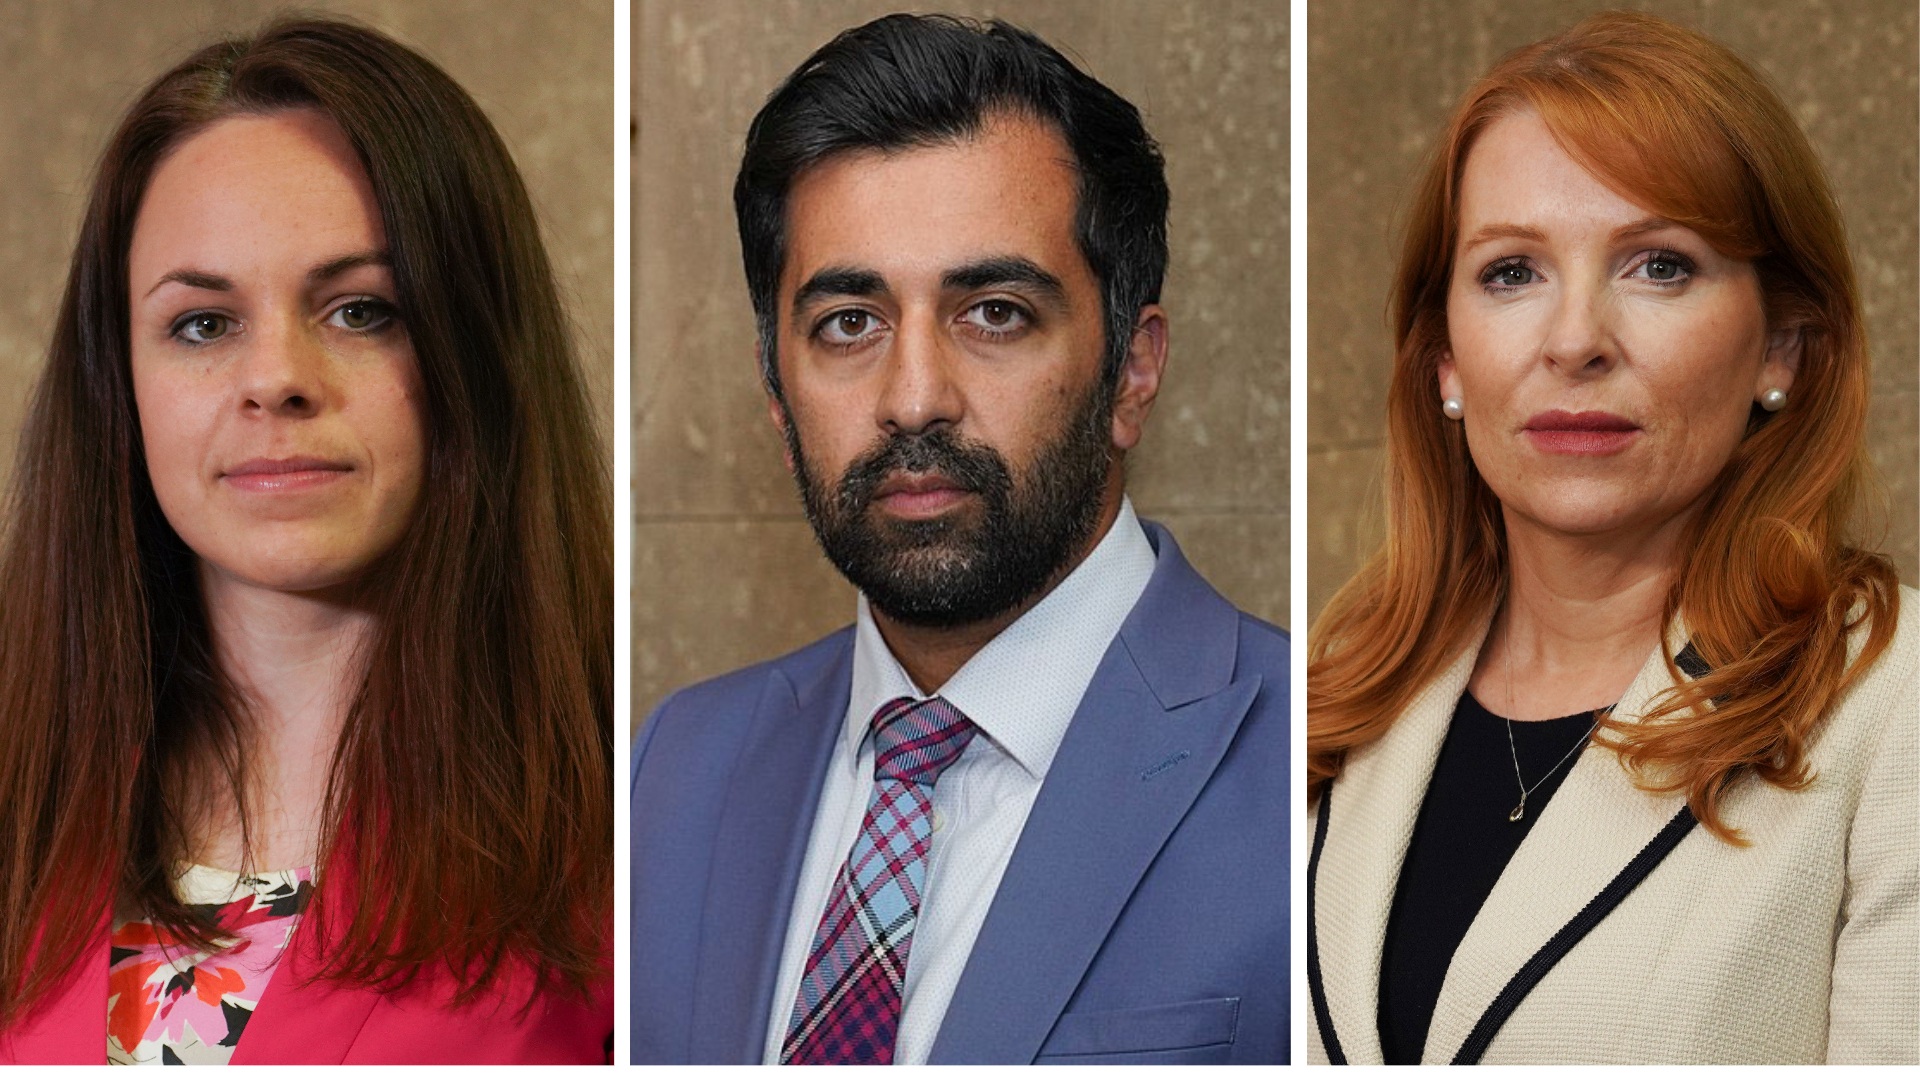 Finance secretary Kate Forbes, health secretary Humza Yousaf and former community safety minister Ash Regan are in the running to become Scotland’s sixth First Minister.